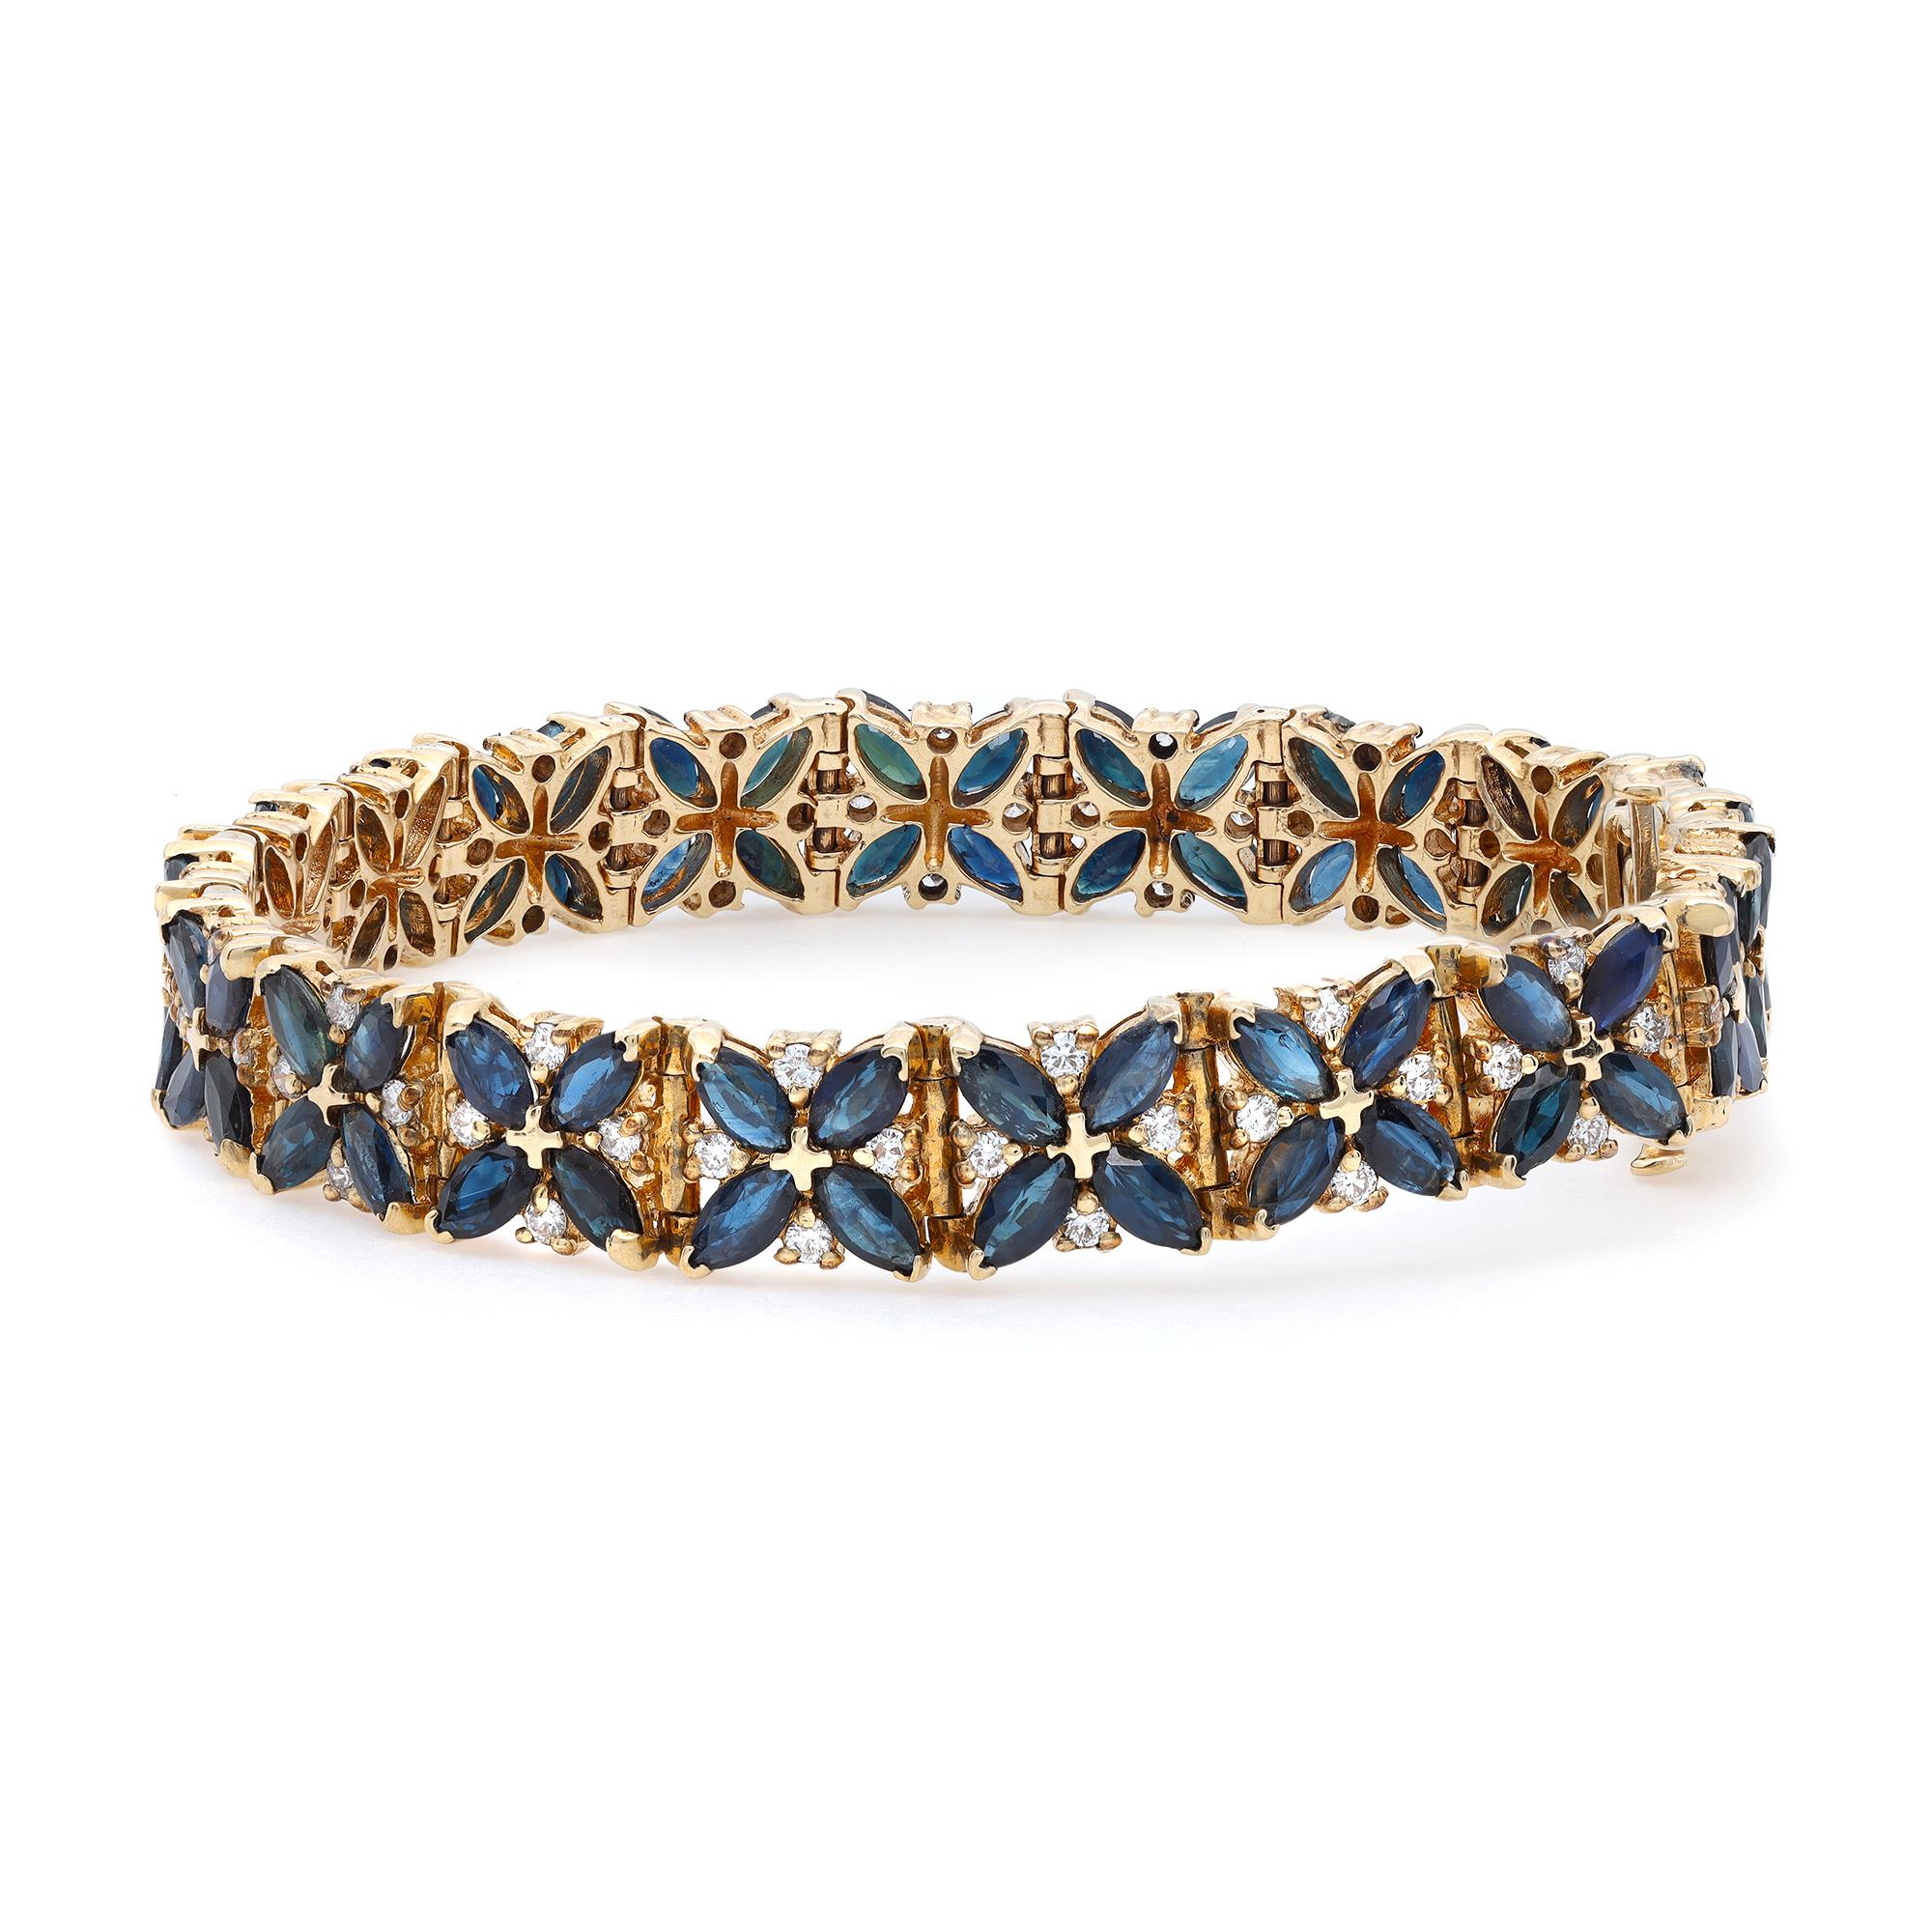 1.00Cttw Diamond & 8.00Cttw Blue Sapphire Tennis Bracelet 14K Yellow Gold In Excellent Condition For Sale In New York, NY